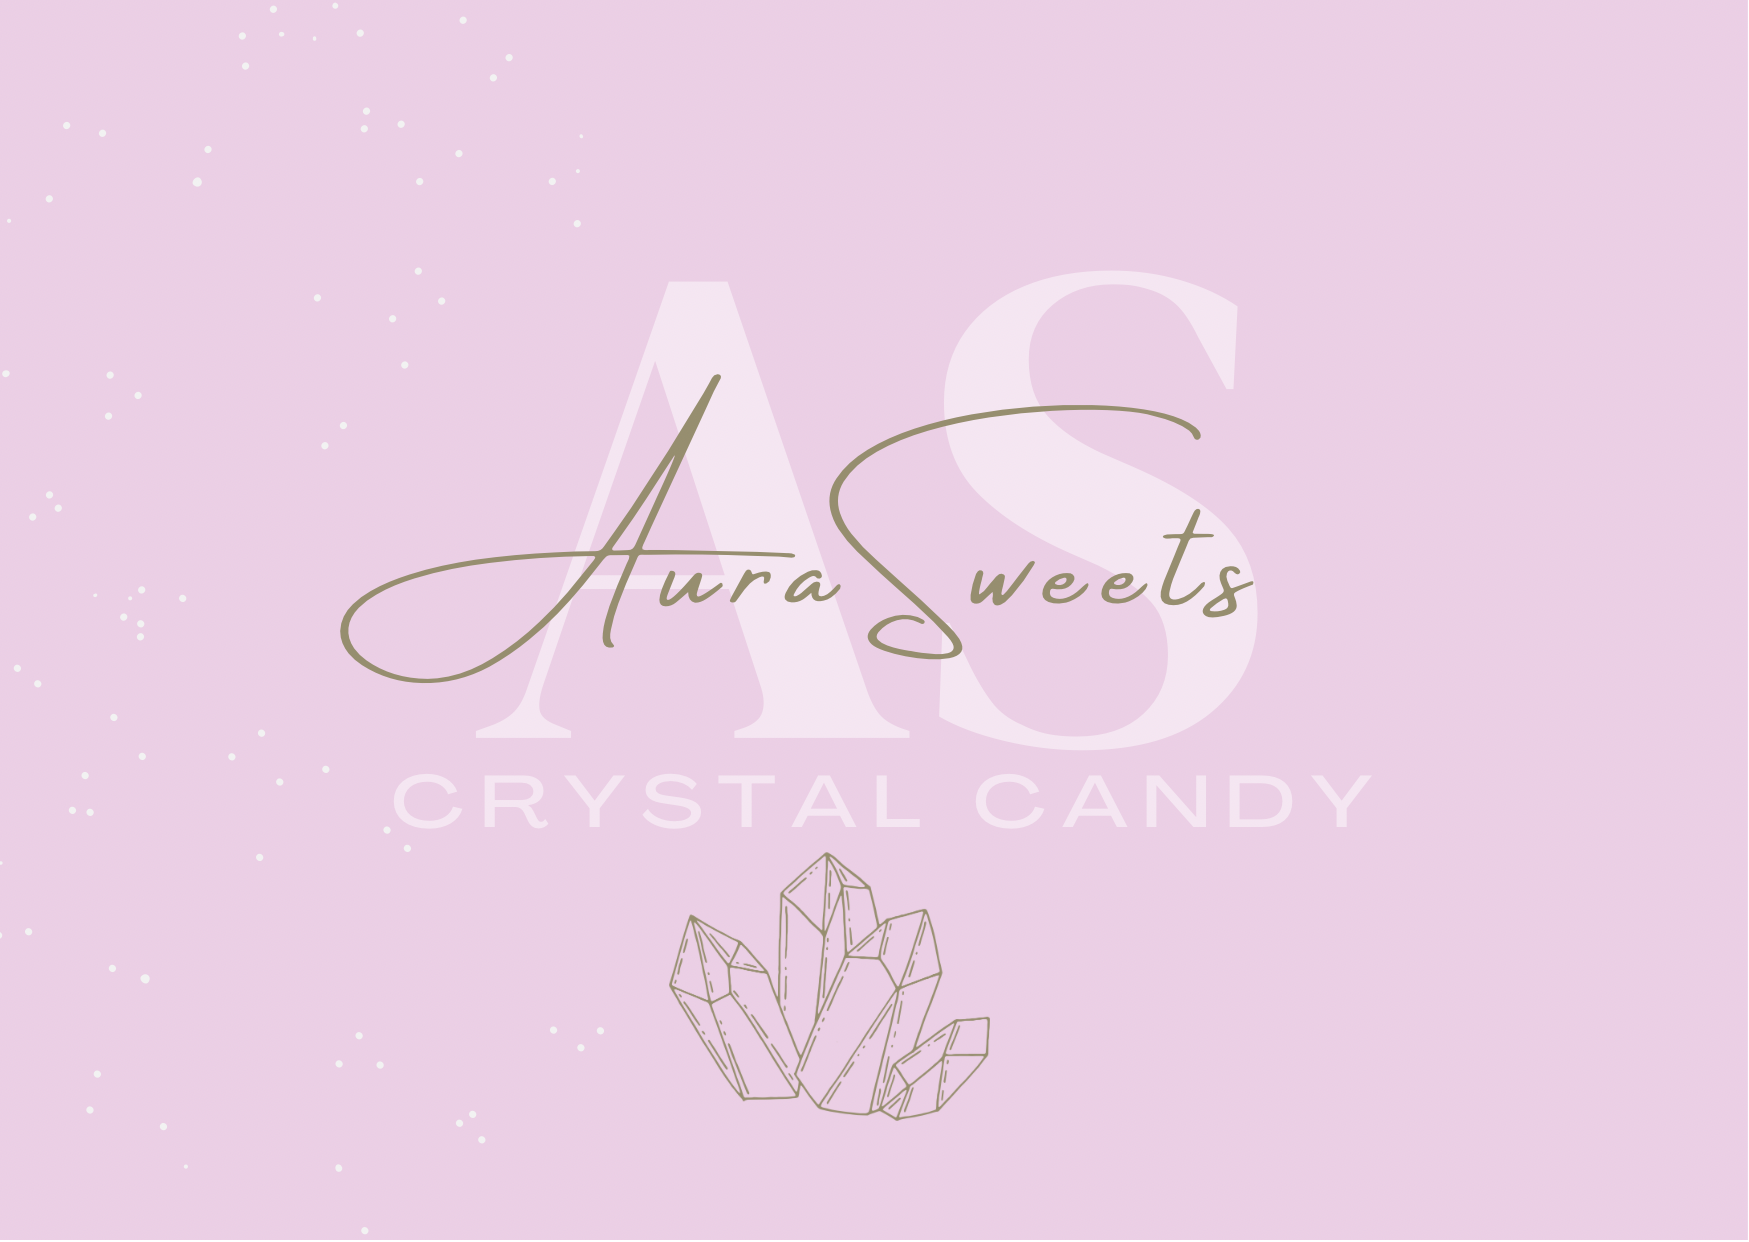 Aura sweets crystal candy